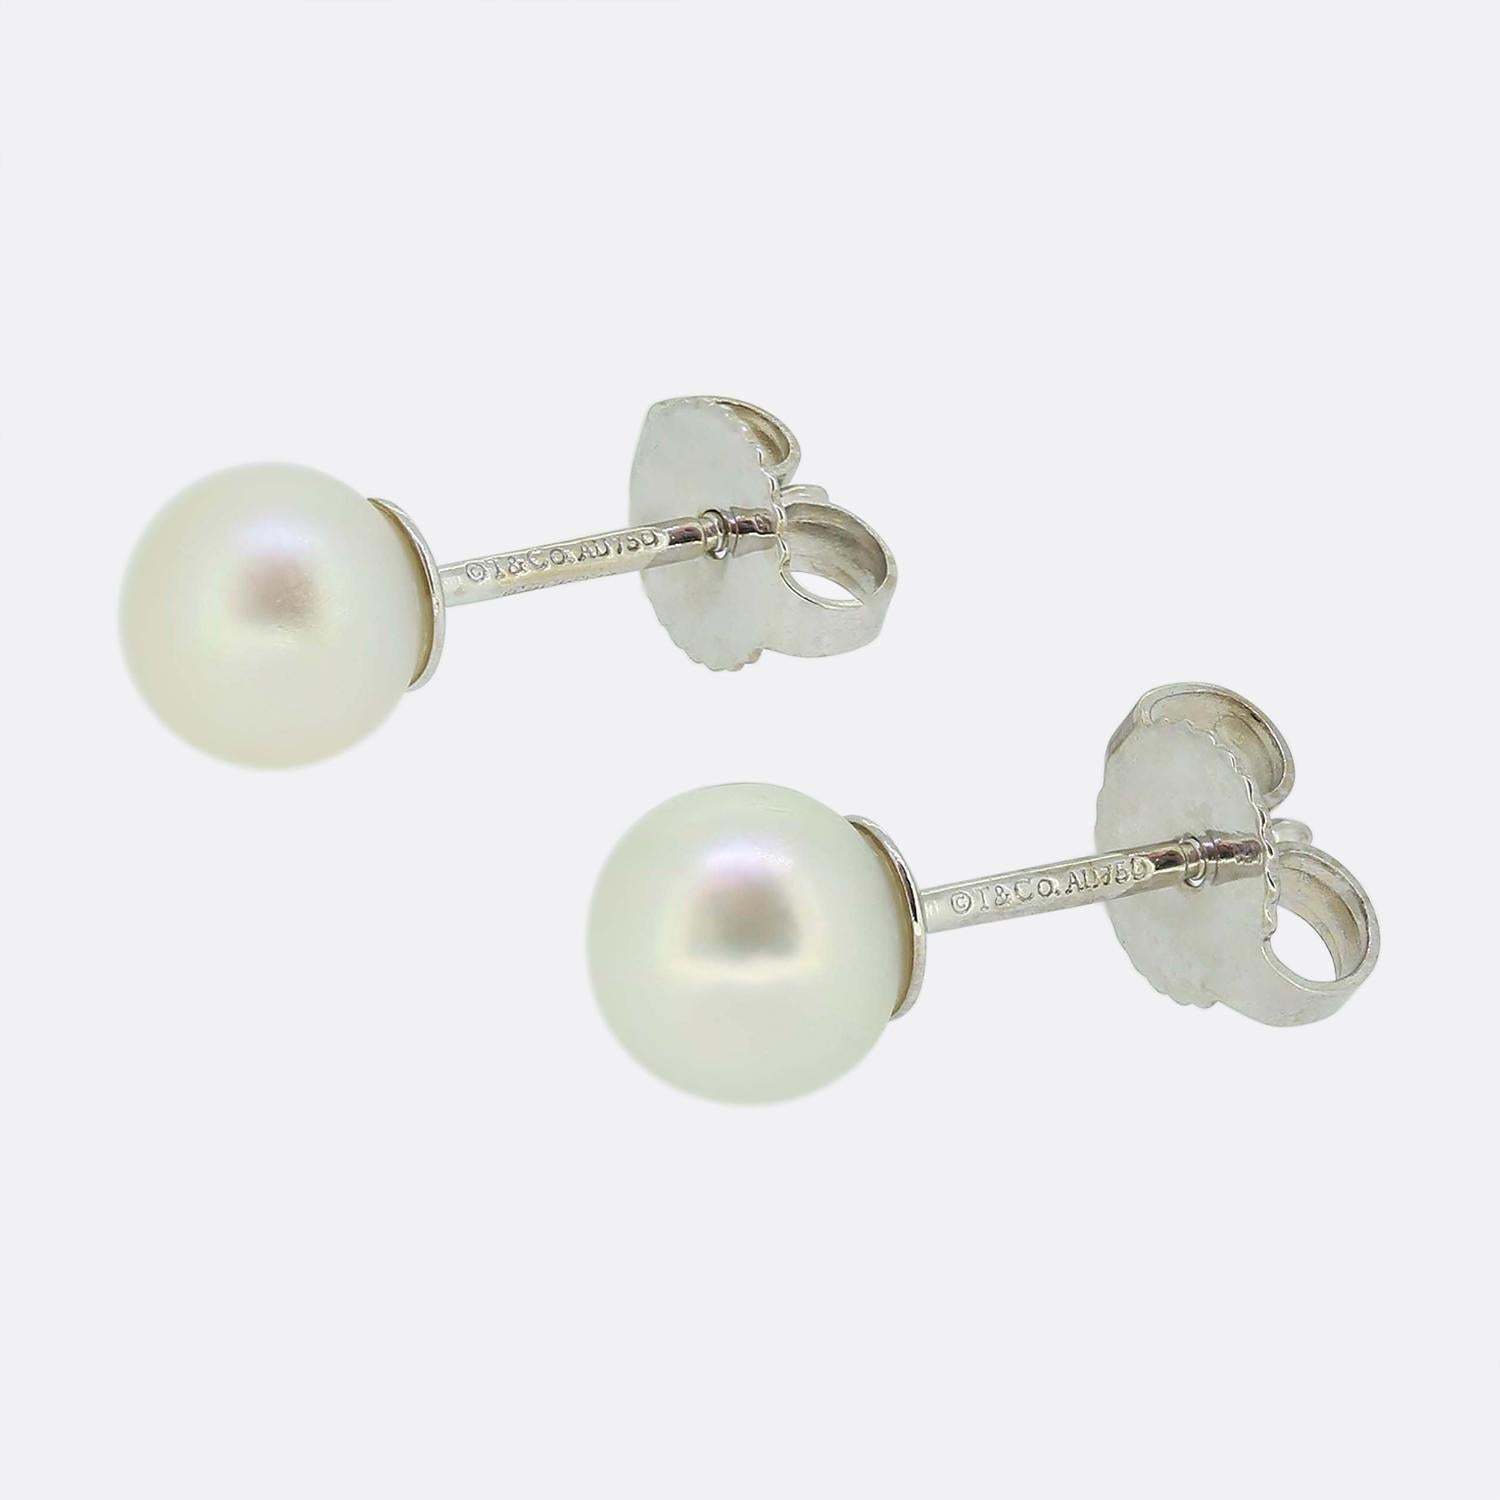 Here we have a classically styled pair of pearl stud earrings from the world renowned jewellery designer, Tiffany & Co. Each piece has been crafted in 18ct white gold and features a single 7mm rounded Akoya cultured pearl.

Condition: Used